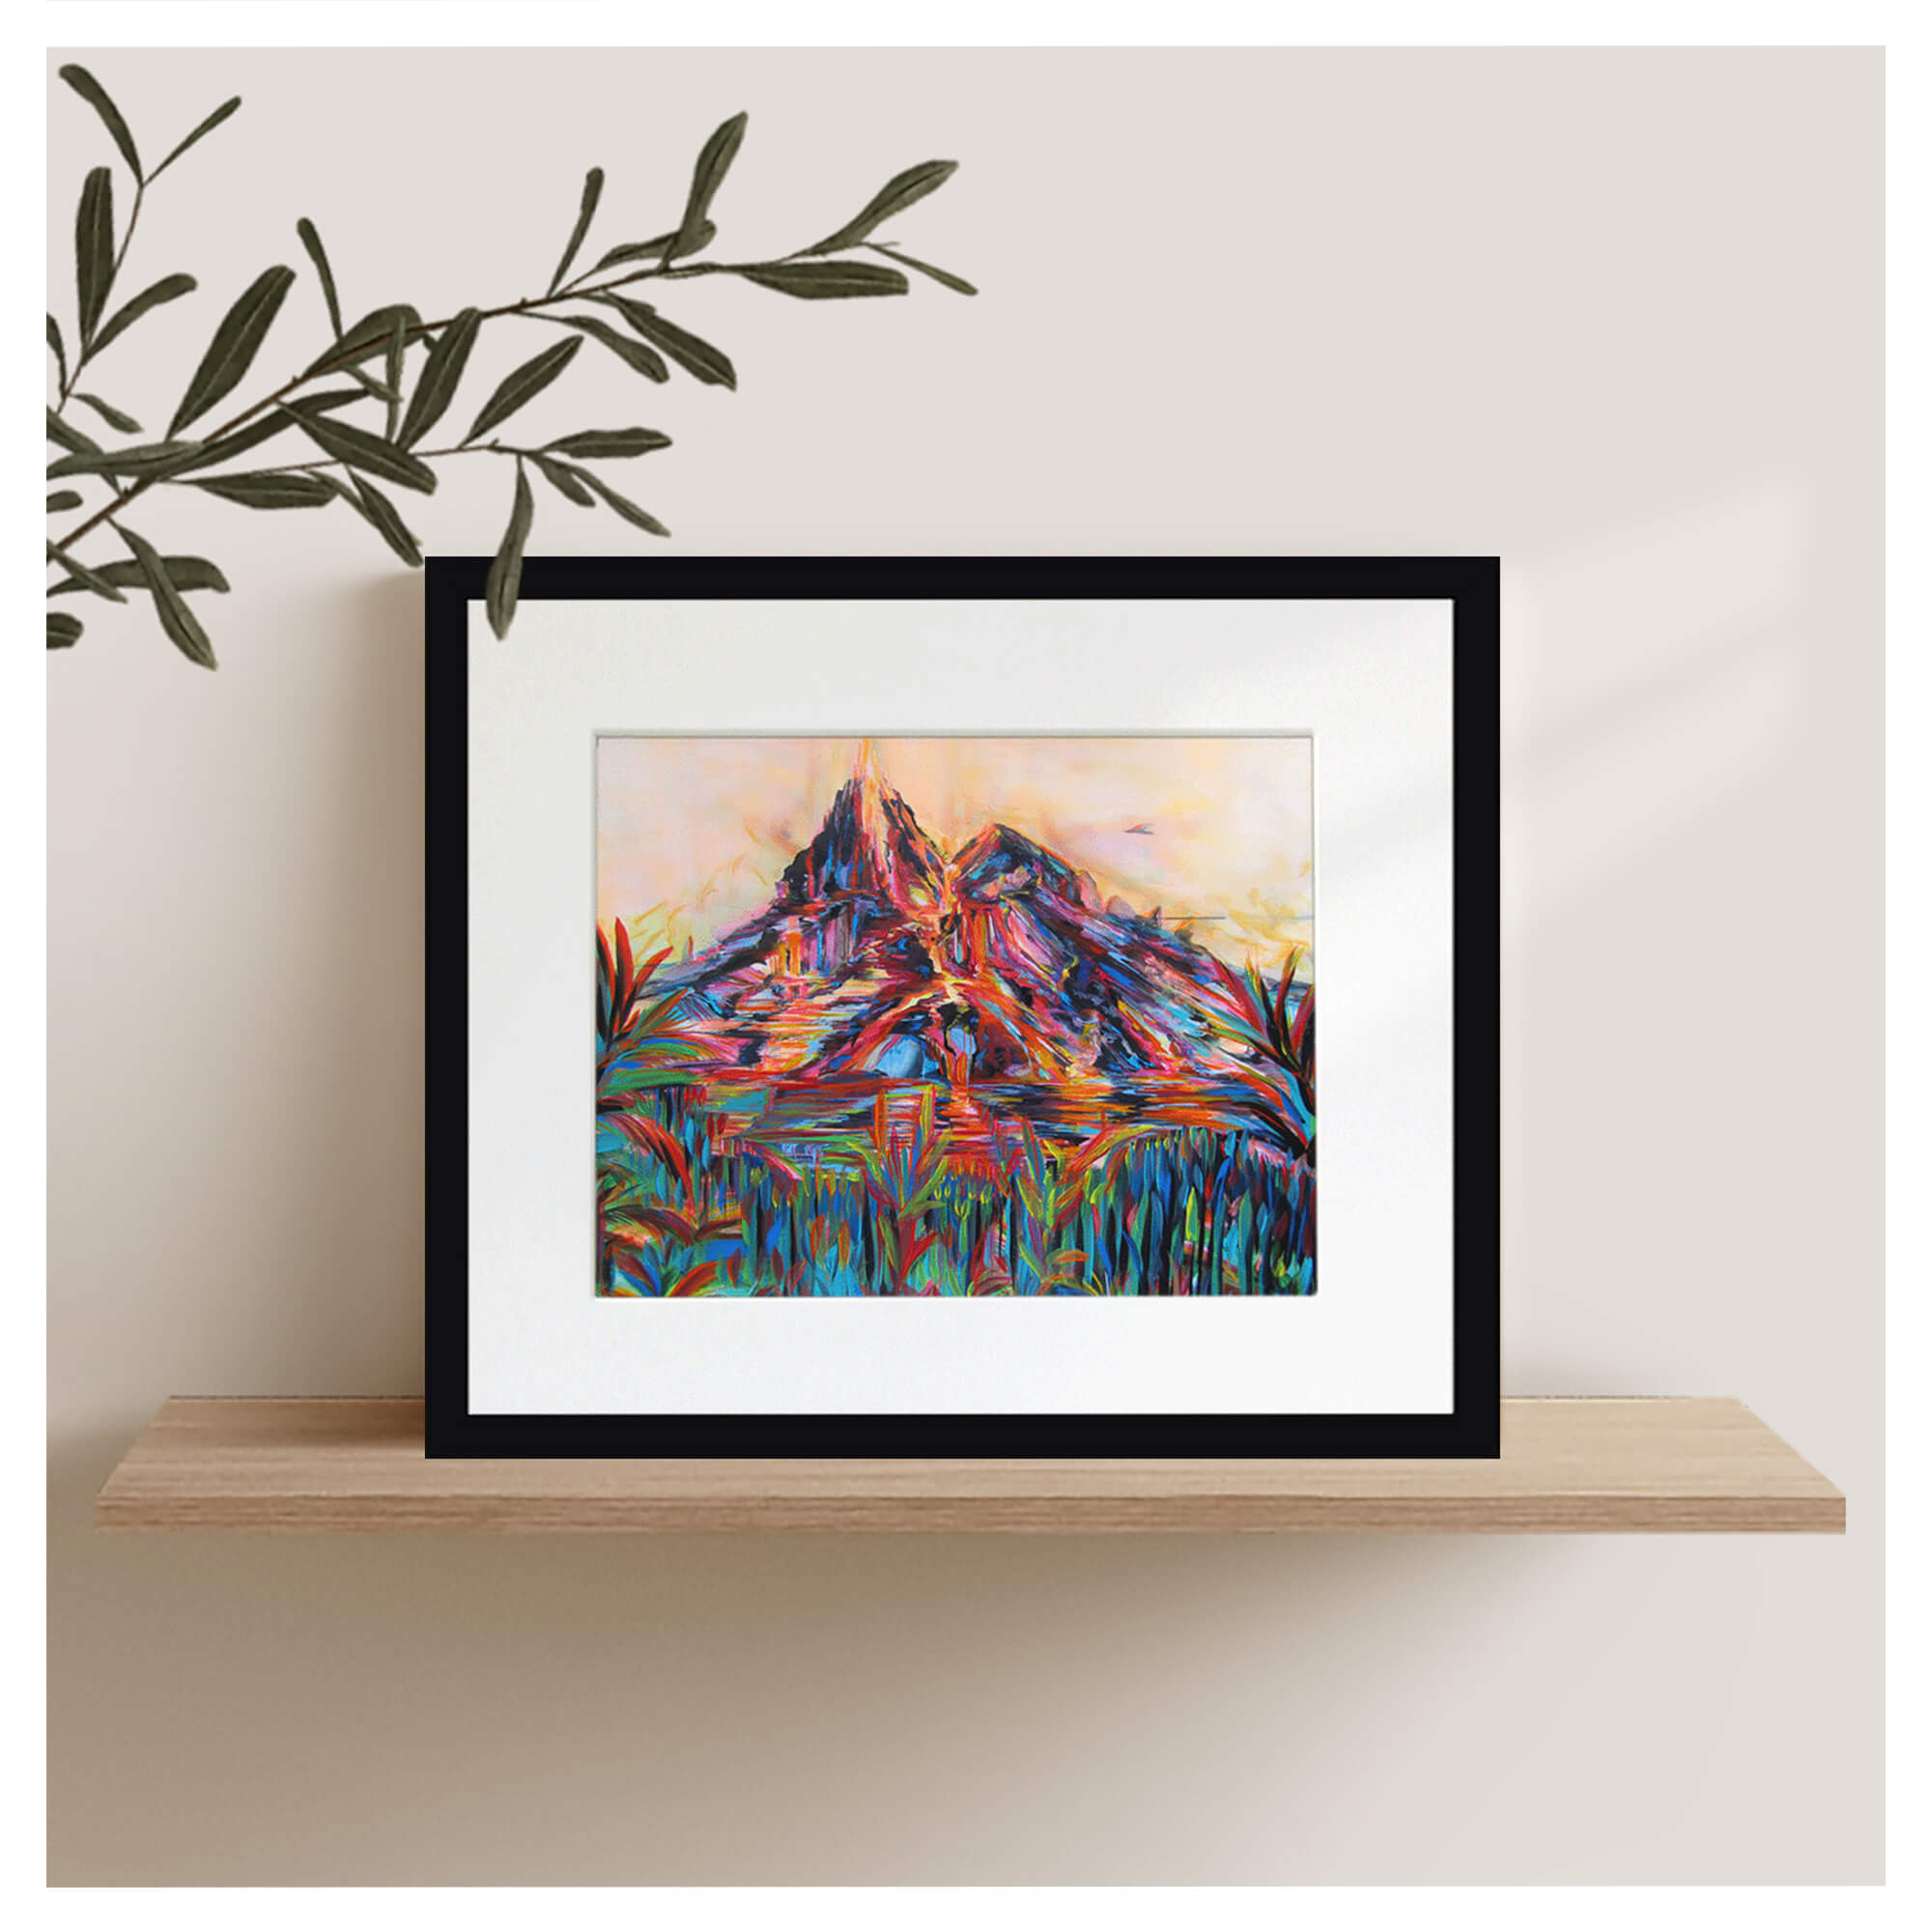 A colorful volcano surrounded with tropical plants by Hawaii artist Jess Burda